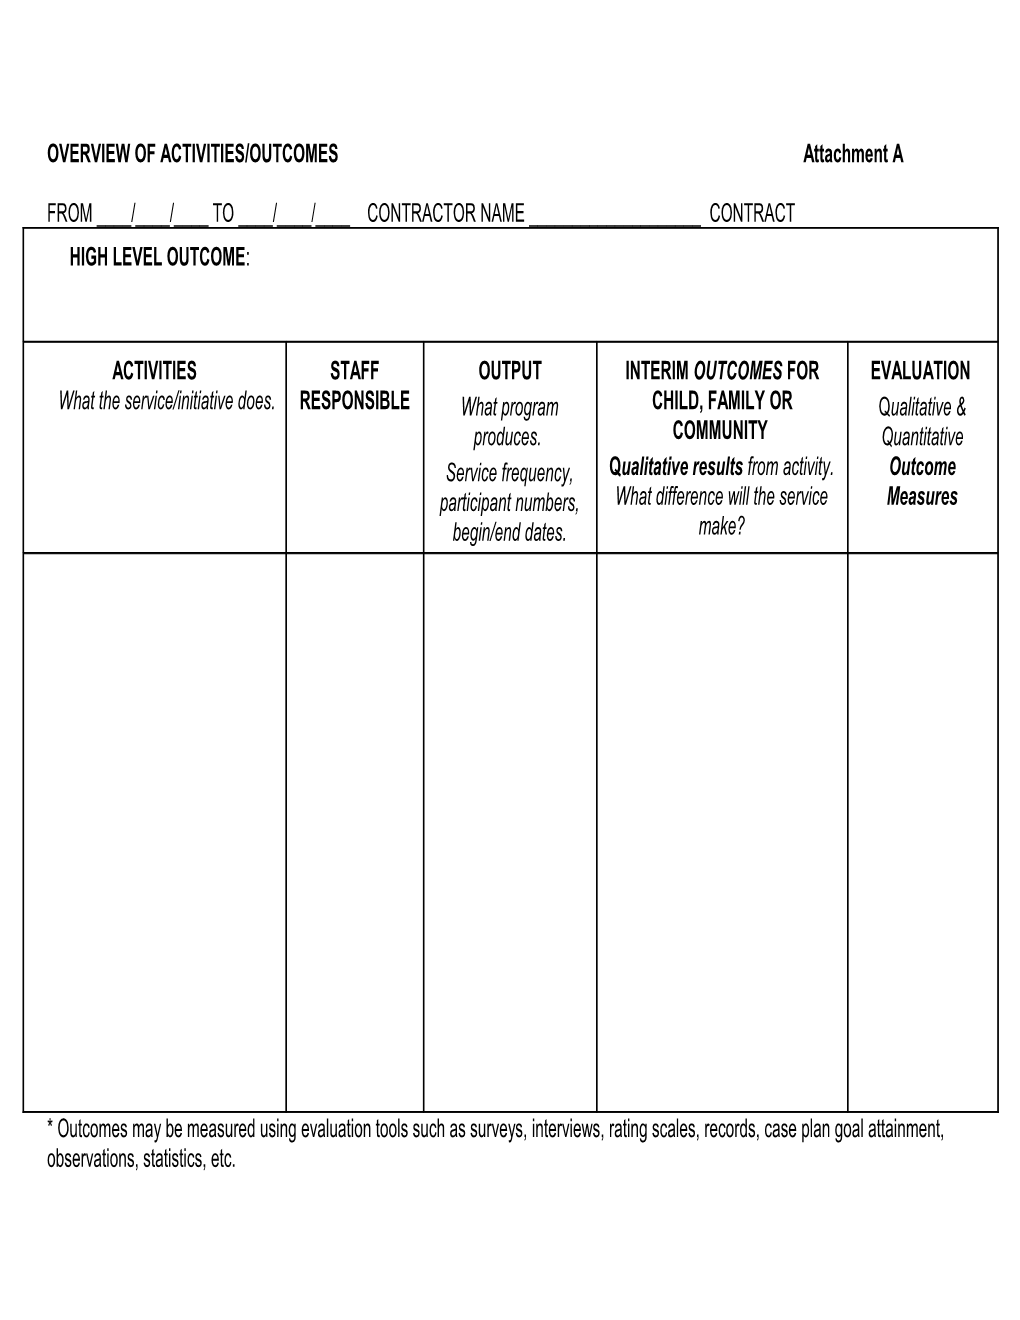 Instructions for Completing Activities/Outcomes Form